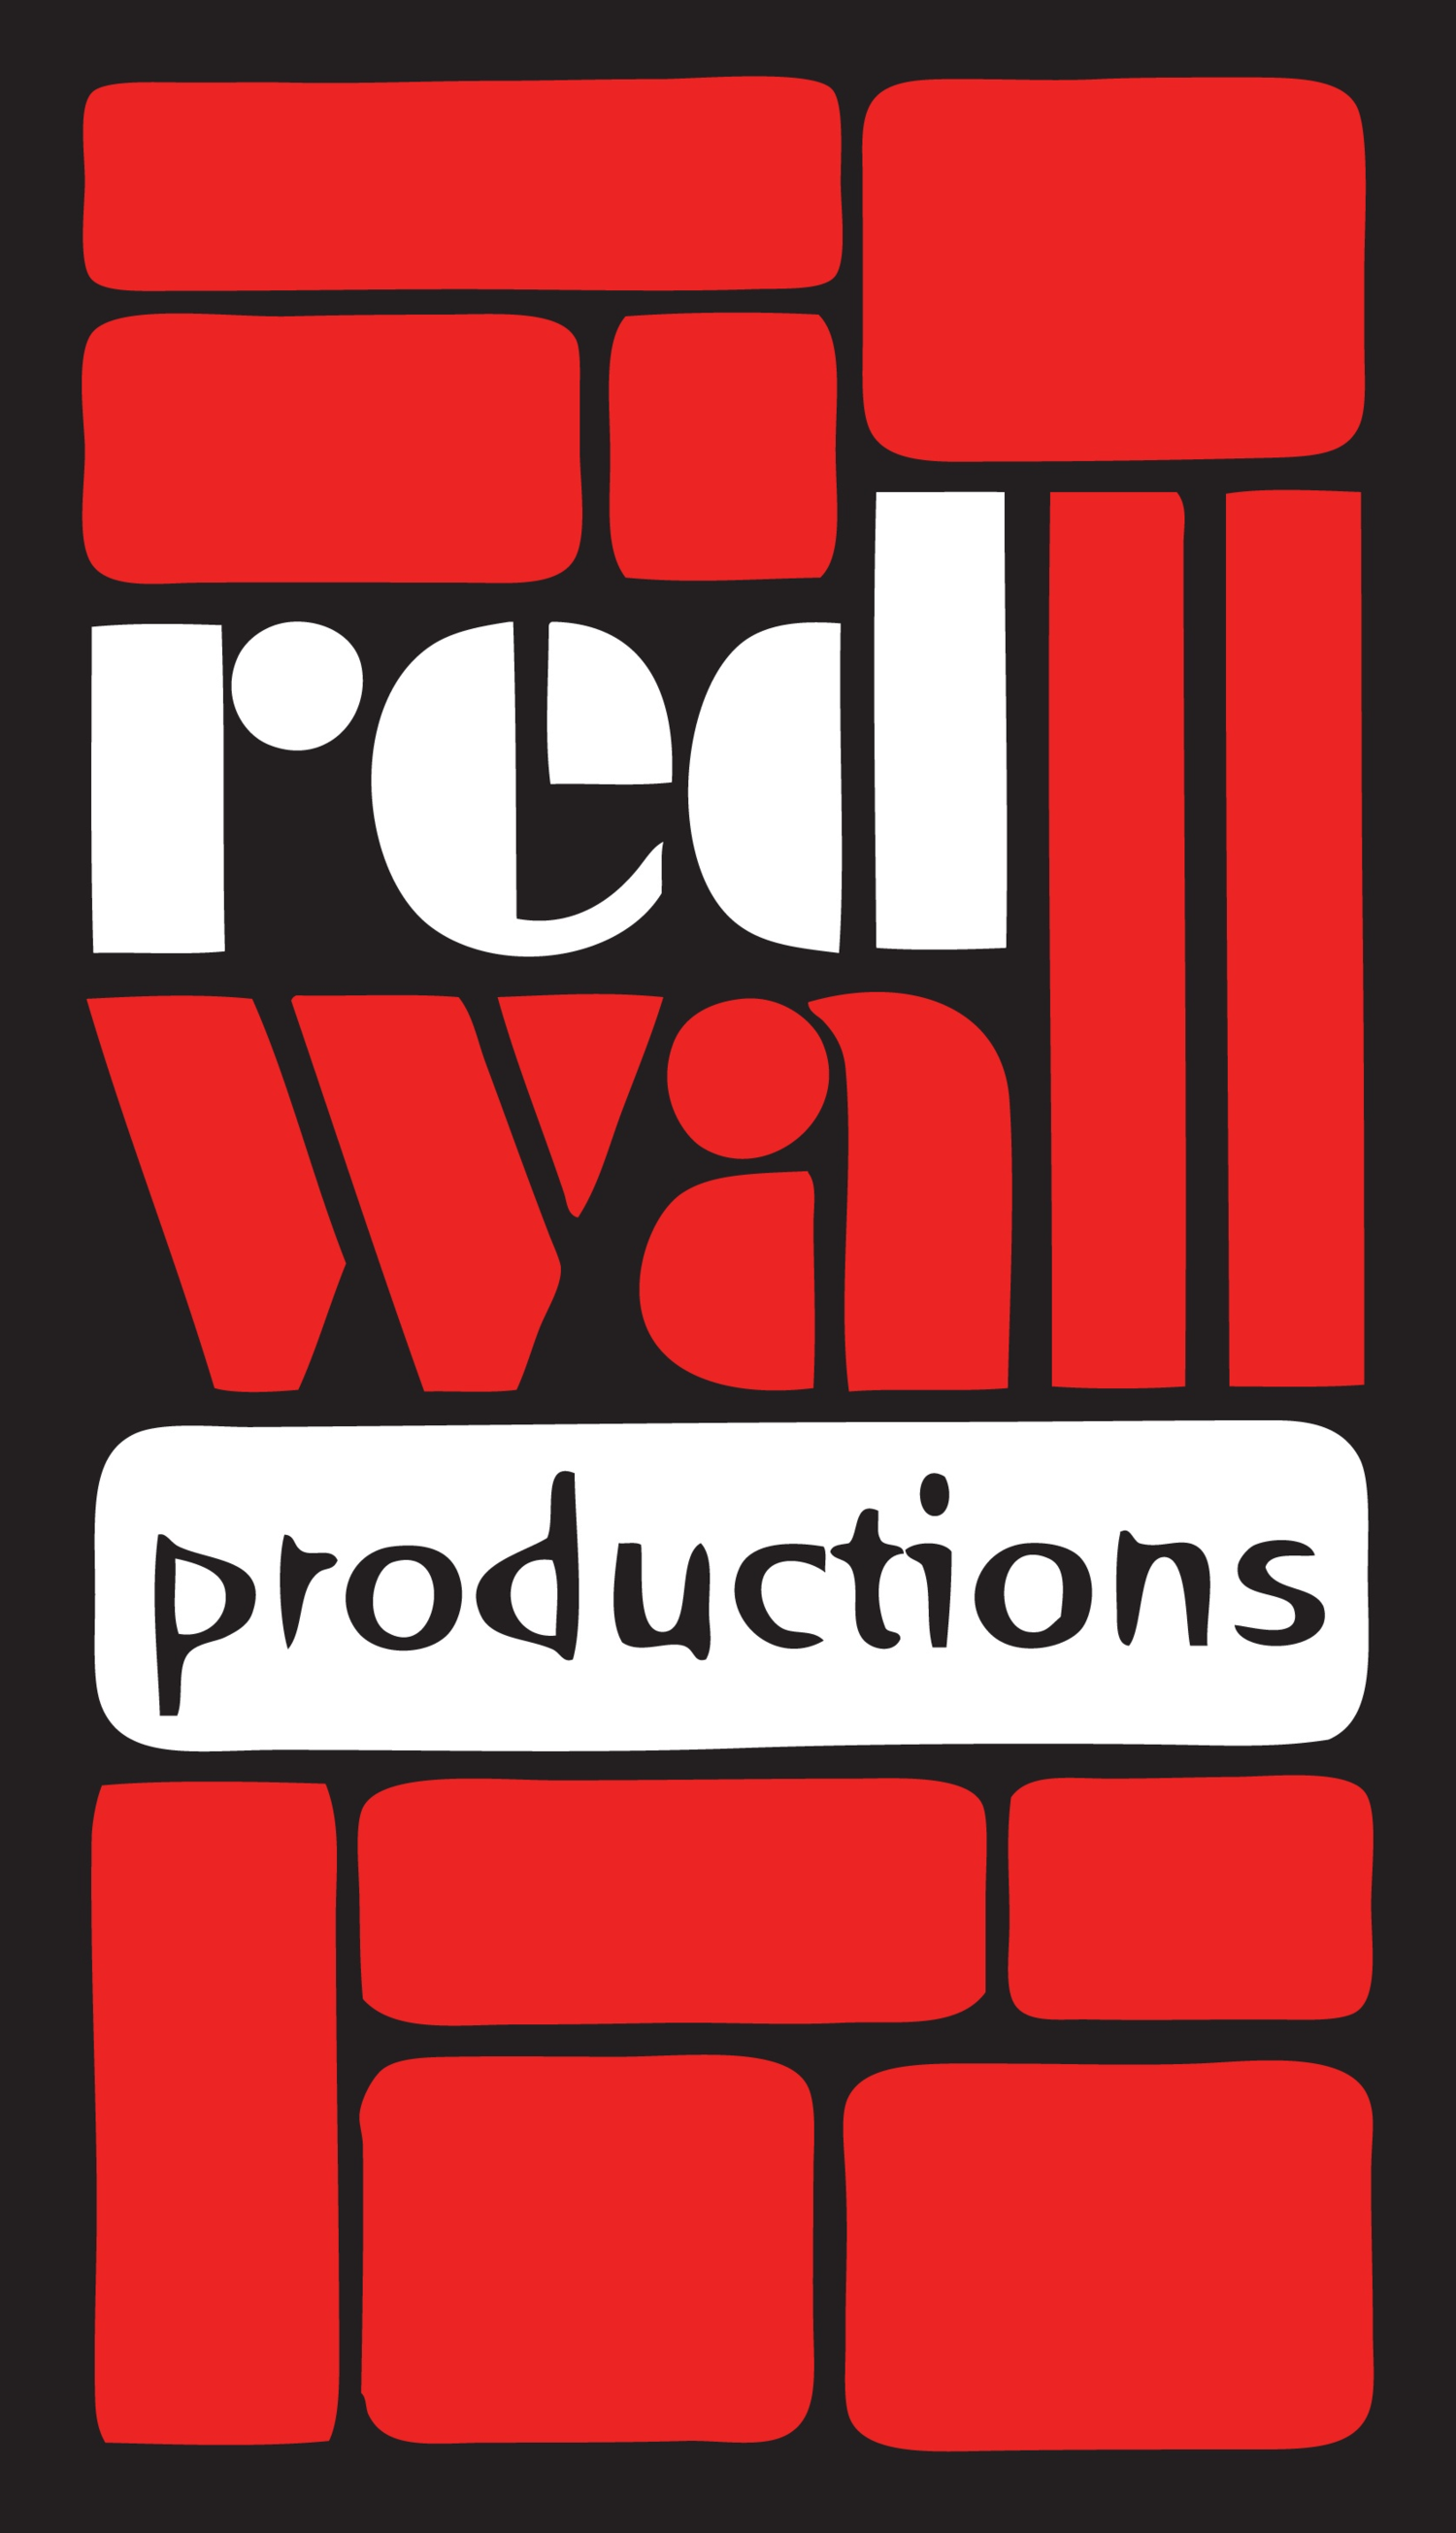 Red Wall Productions